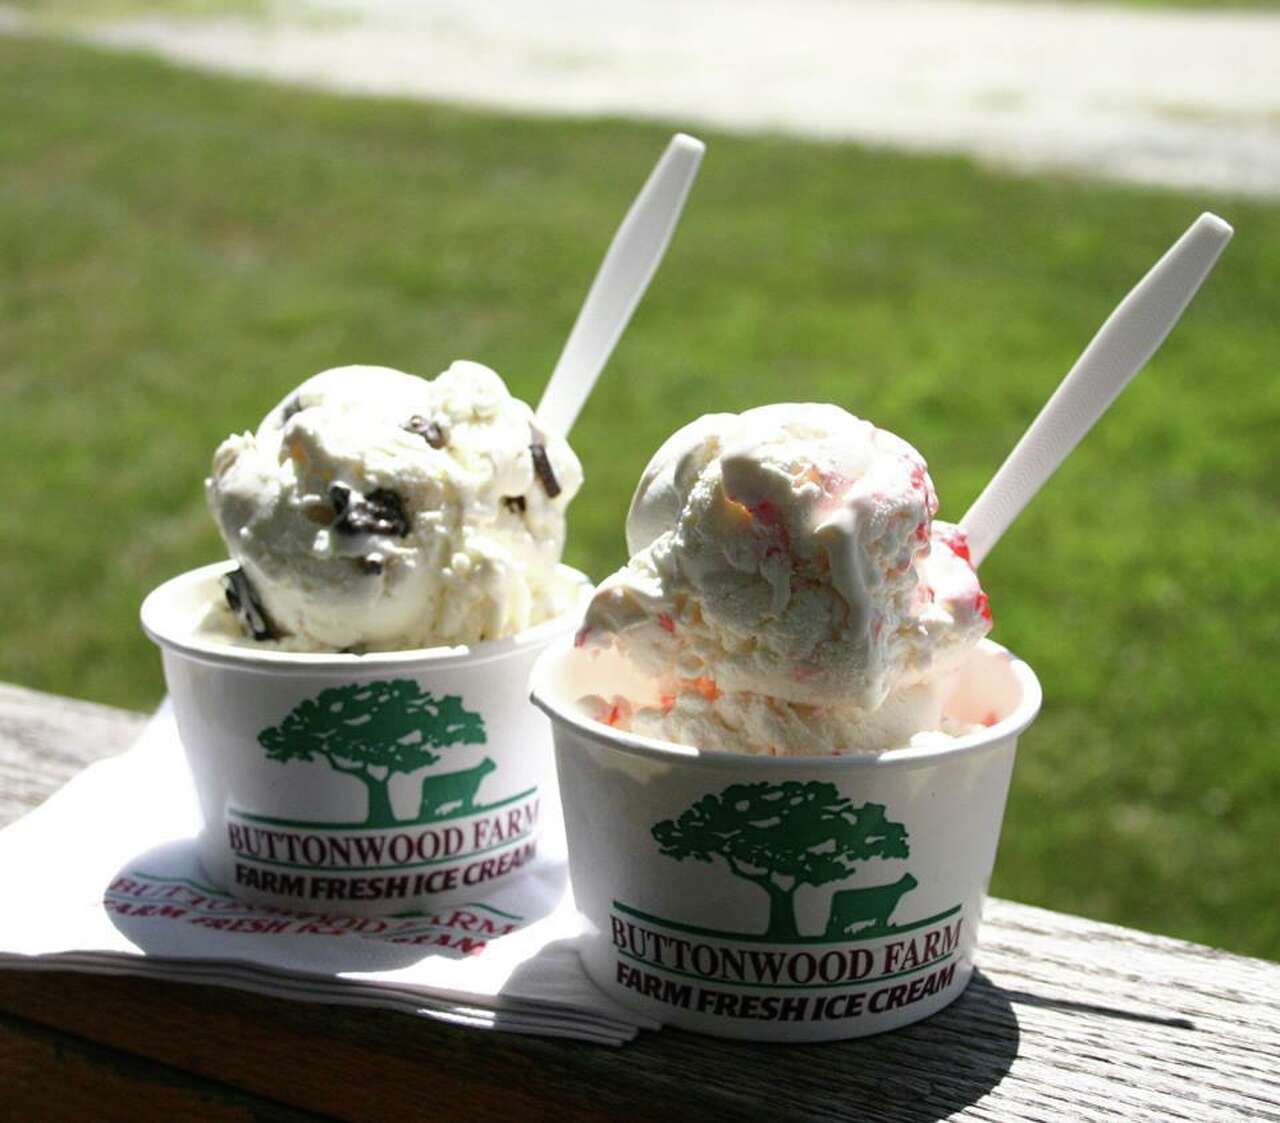 A Guide To 25 Places For Ice Cream In Connecticut